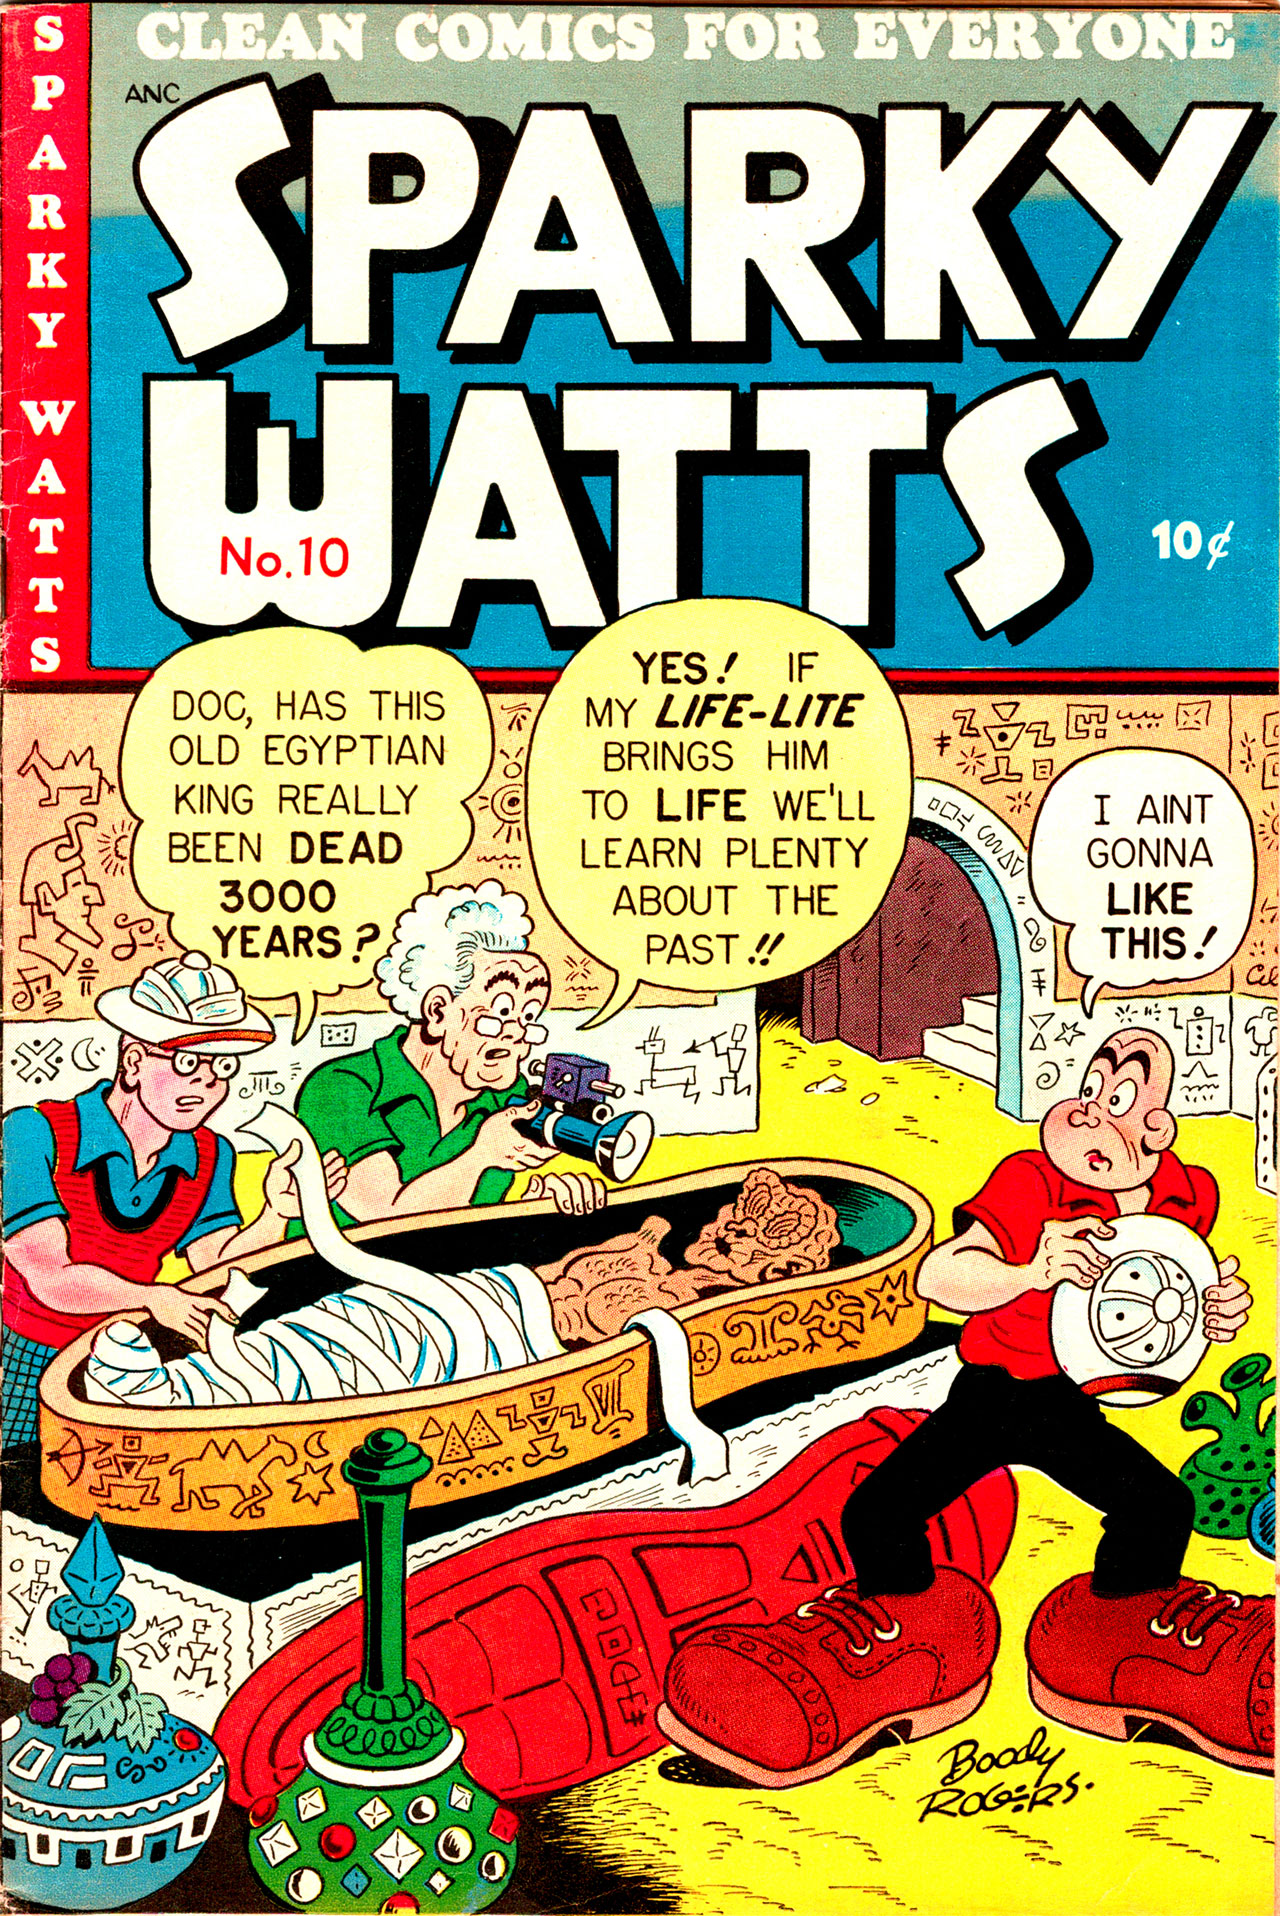 Read online Sparky Watts comic -  Issue #10 - 1